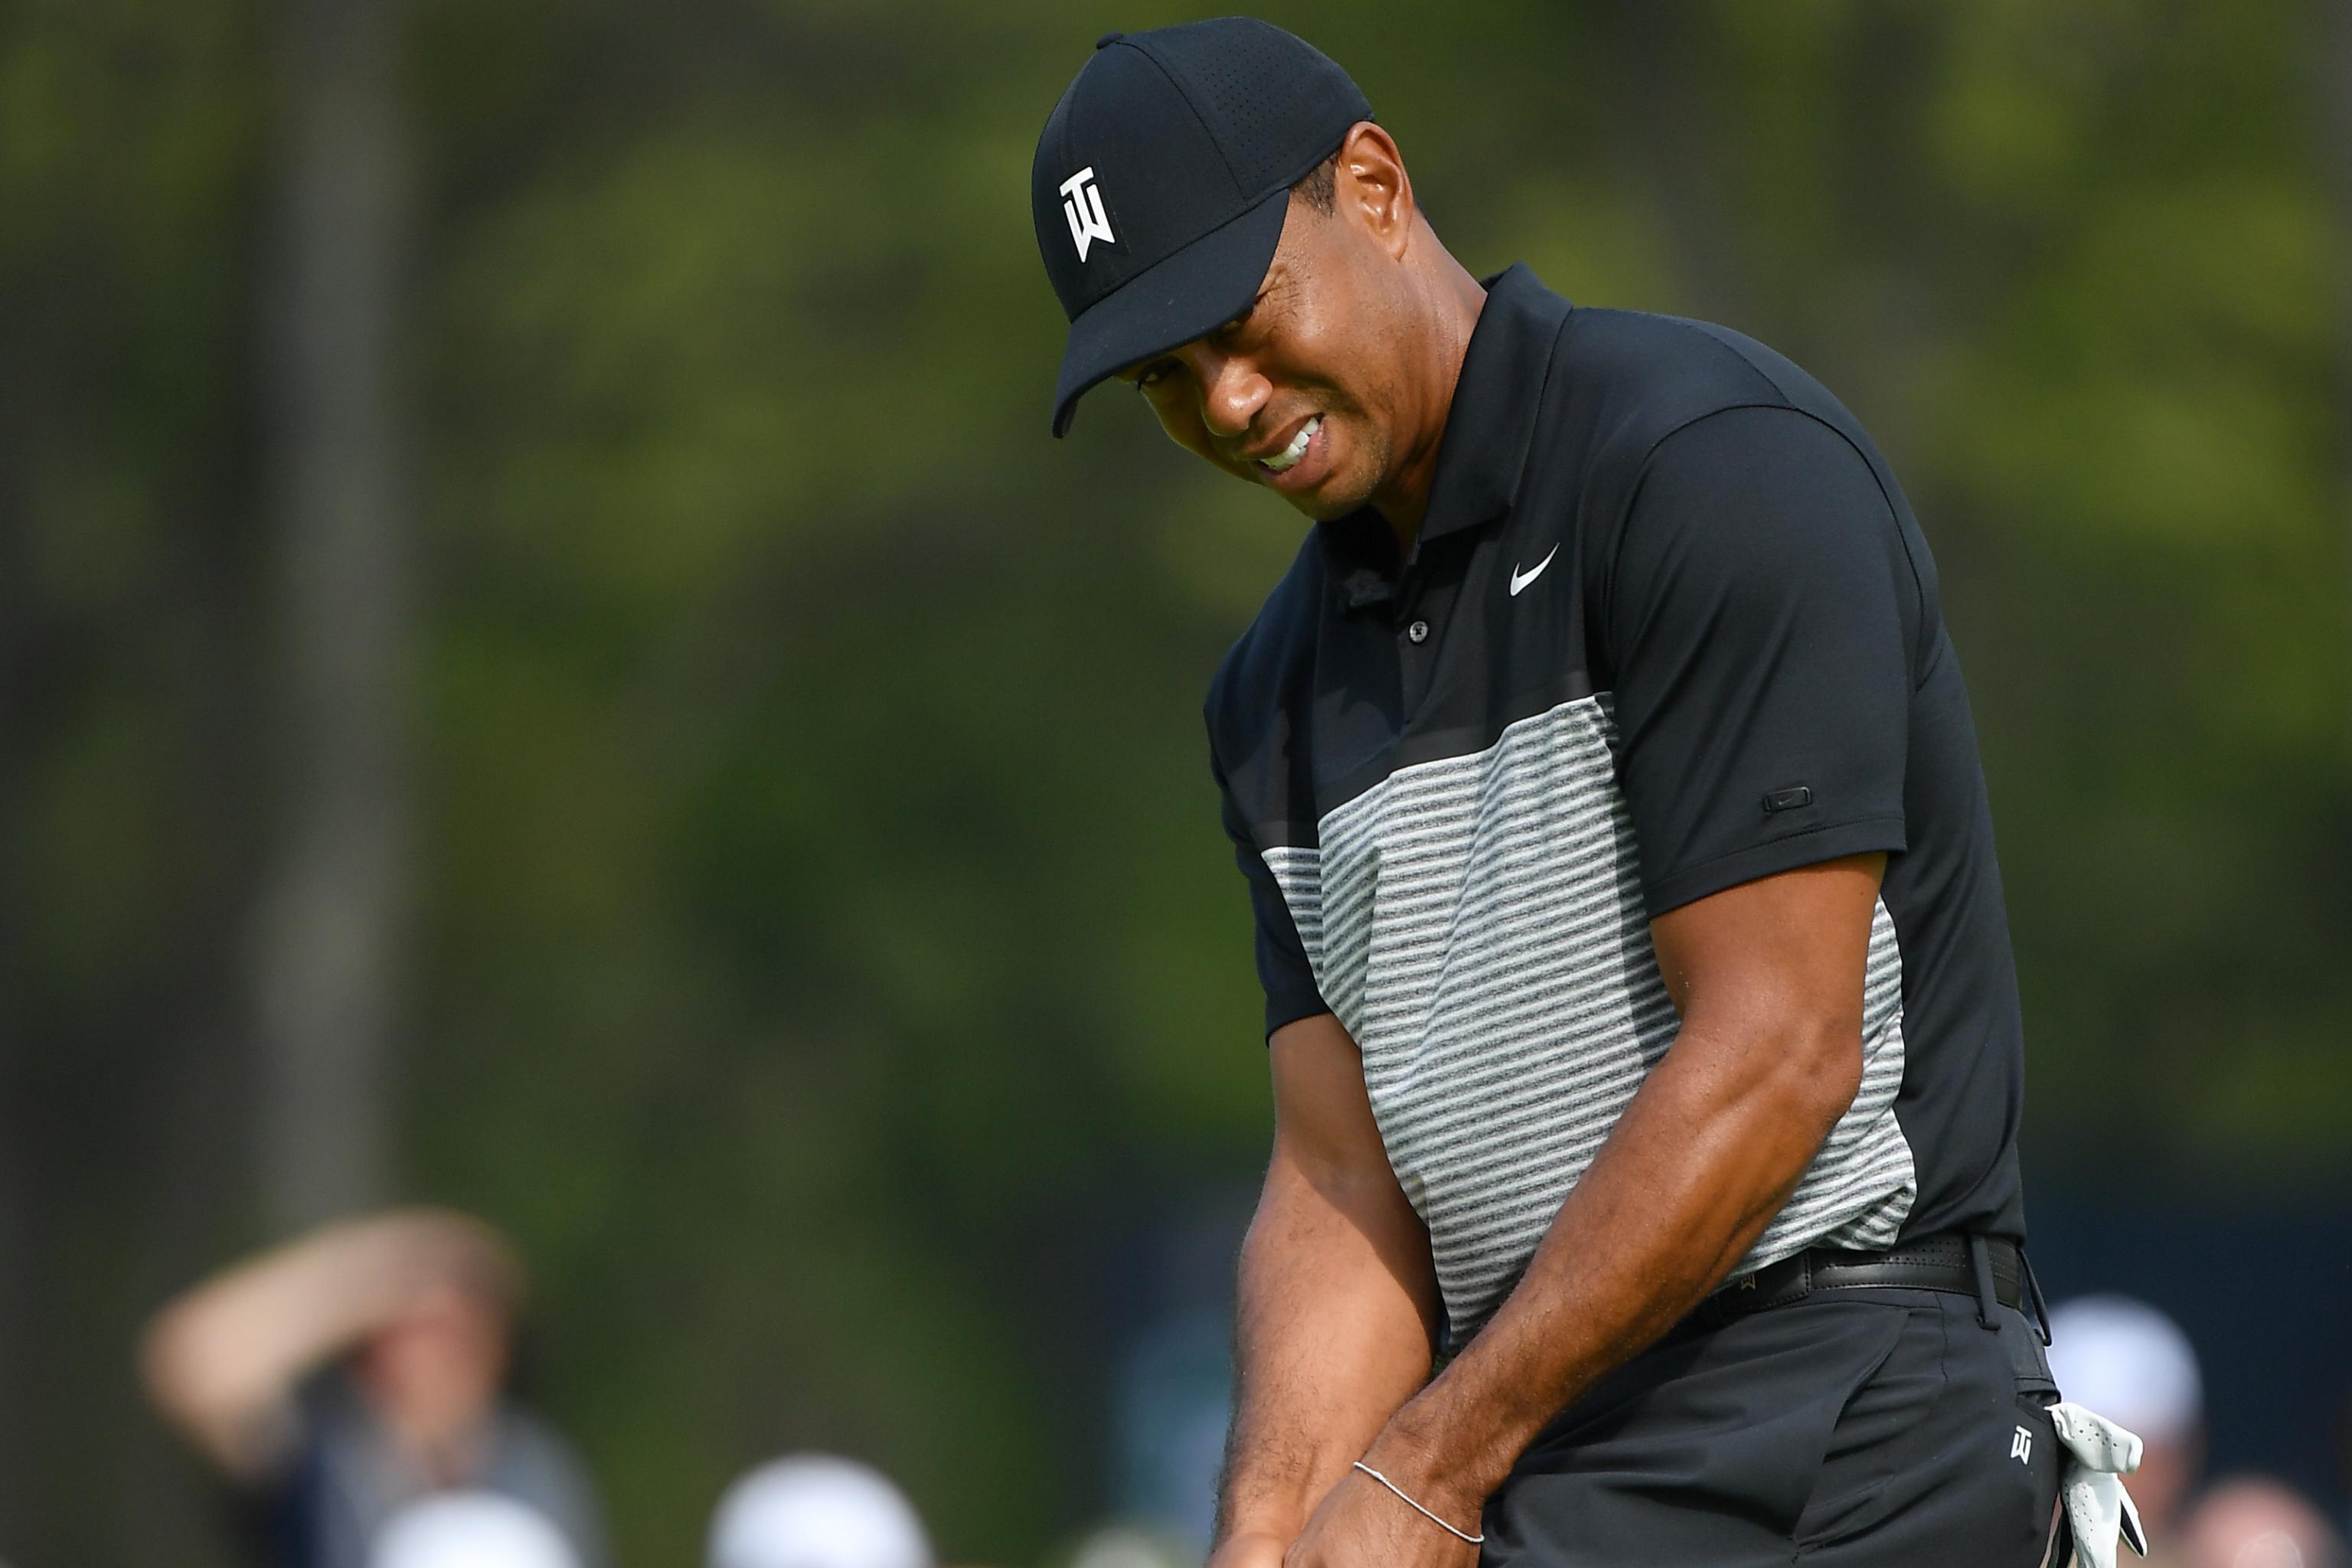 Tiger Woods Misses 2019 Pga Championship Cut At 5 Over Par After 73 In Round 2 Bleacher Report Latest News Videos And Highlights